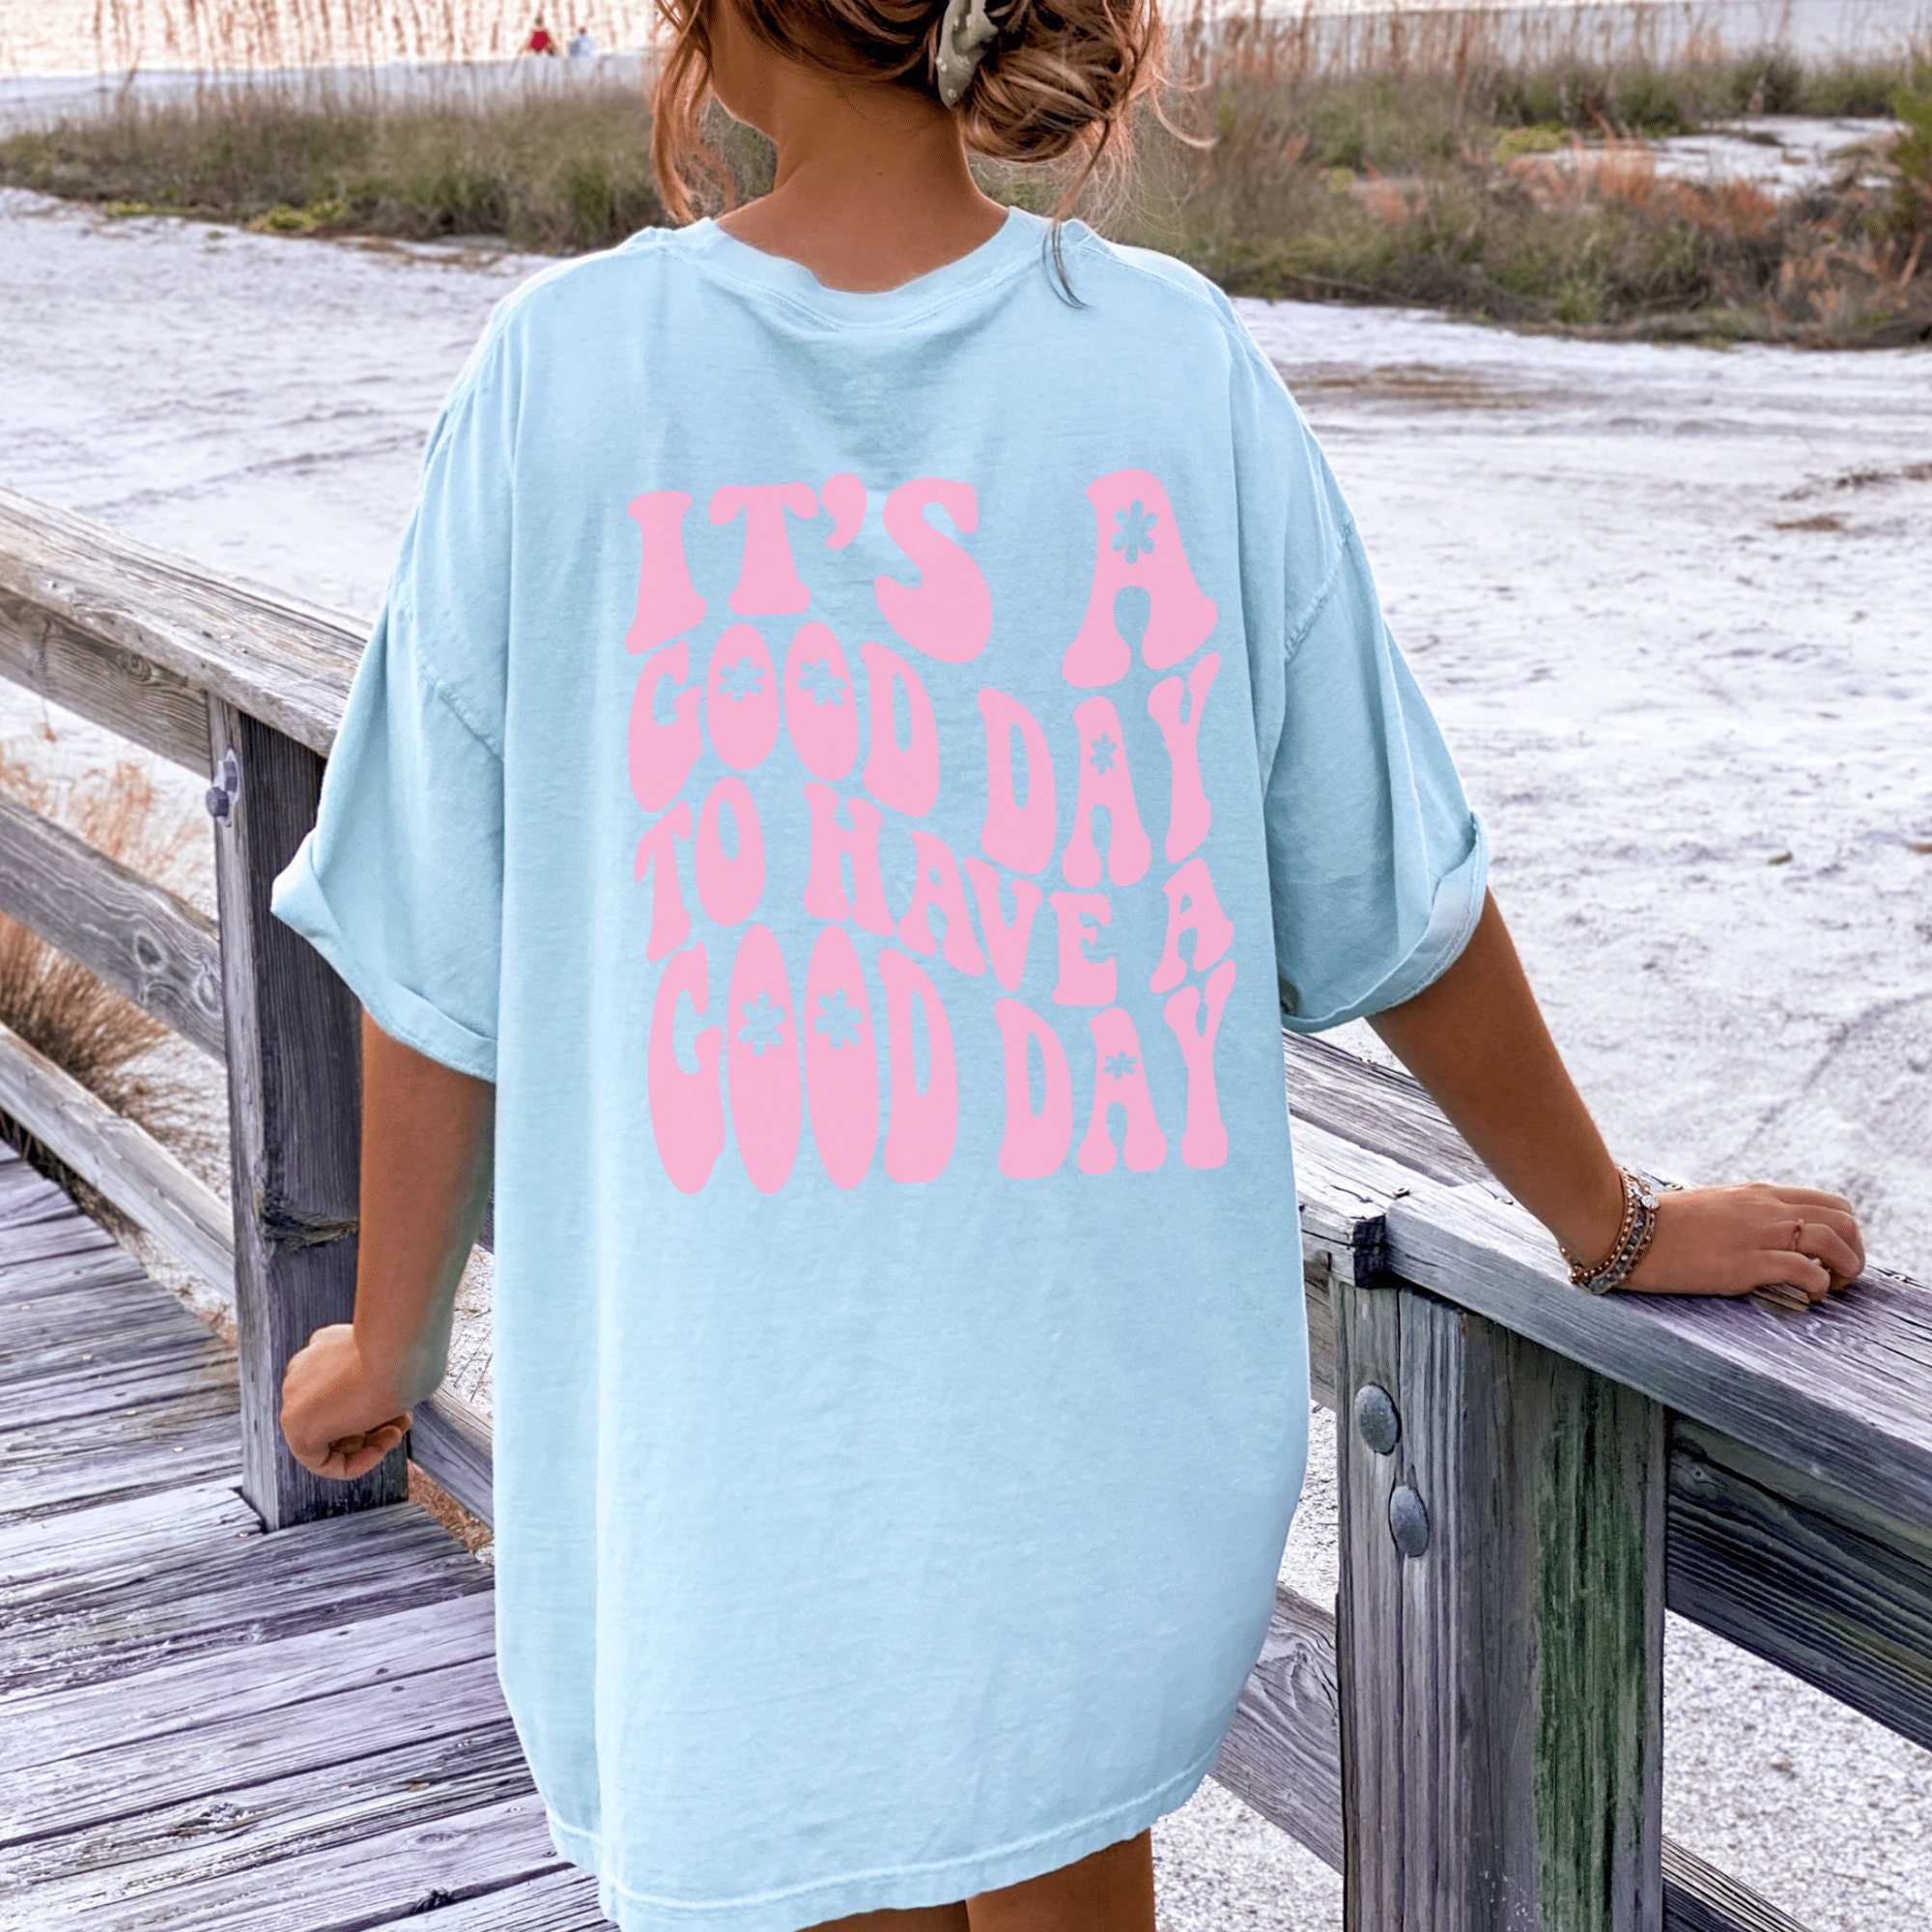 Retro Positive Quote Shirt VSCO Tshirt Oversized Preppy Shirt Coconut Girl  Trendy Aesthetic Tee Preppy Clothes Teens Words on Back Beachy 